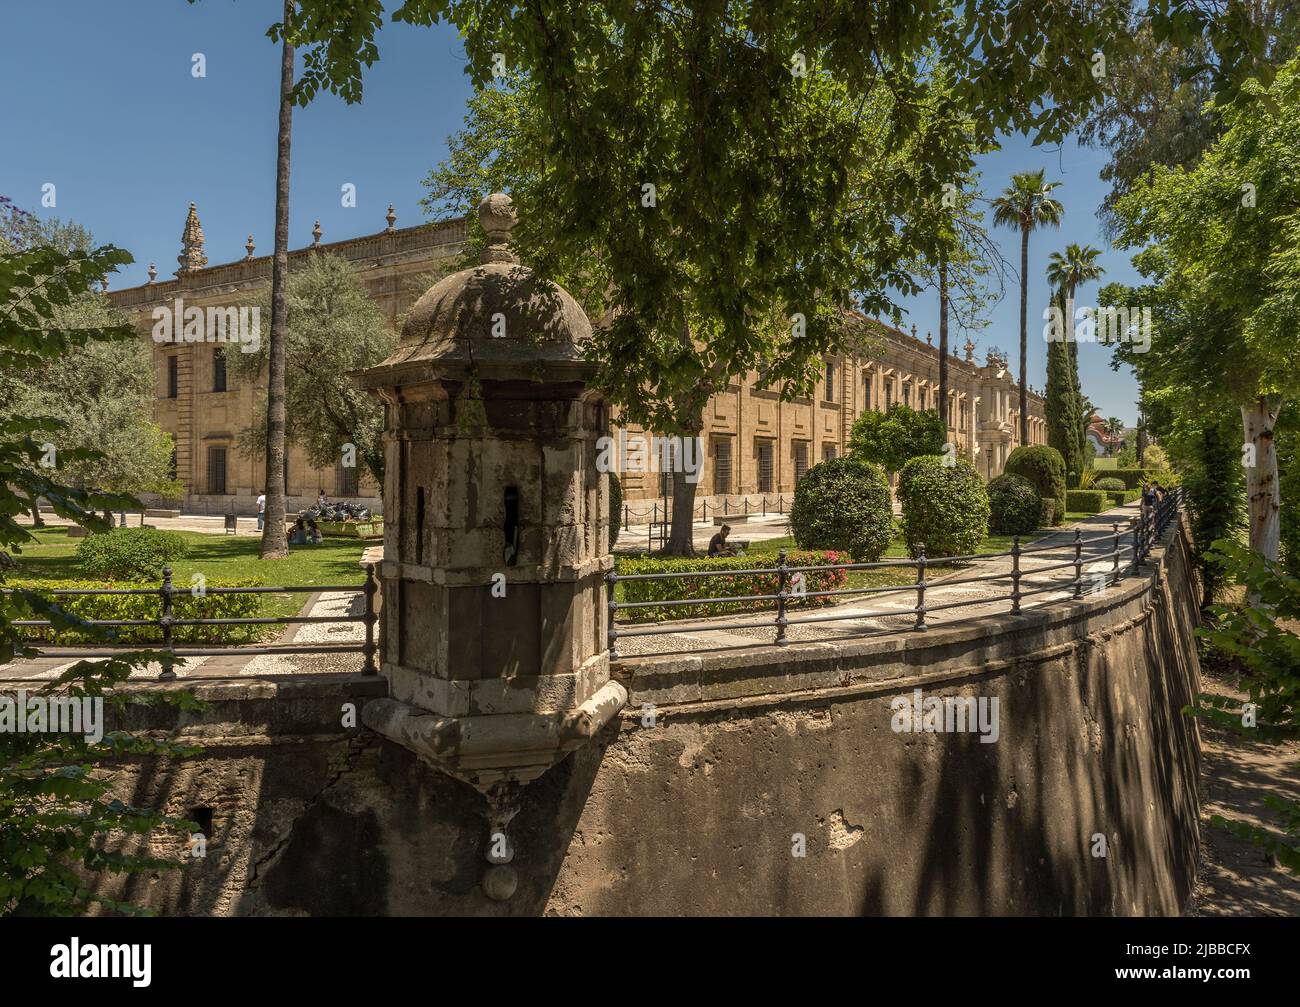 University of Seville building, formerly Real Fabrica de Tabacos Stock Photo